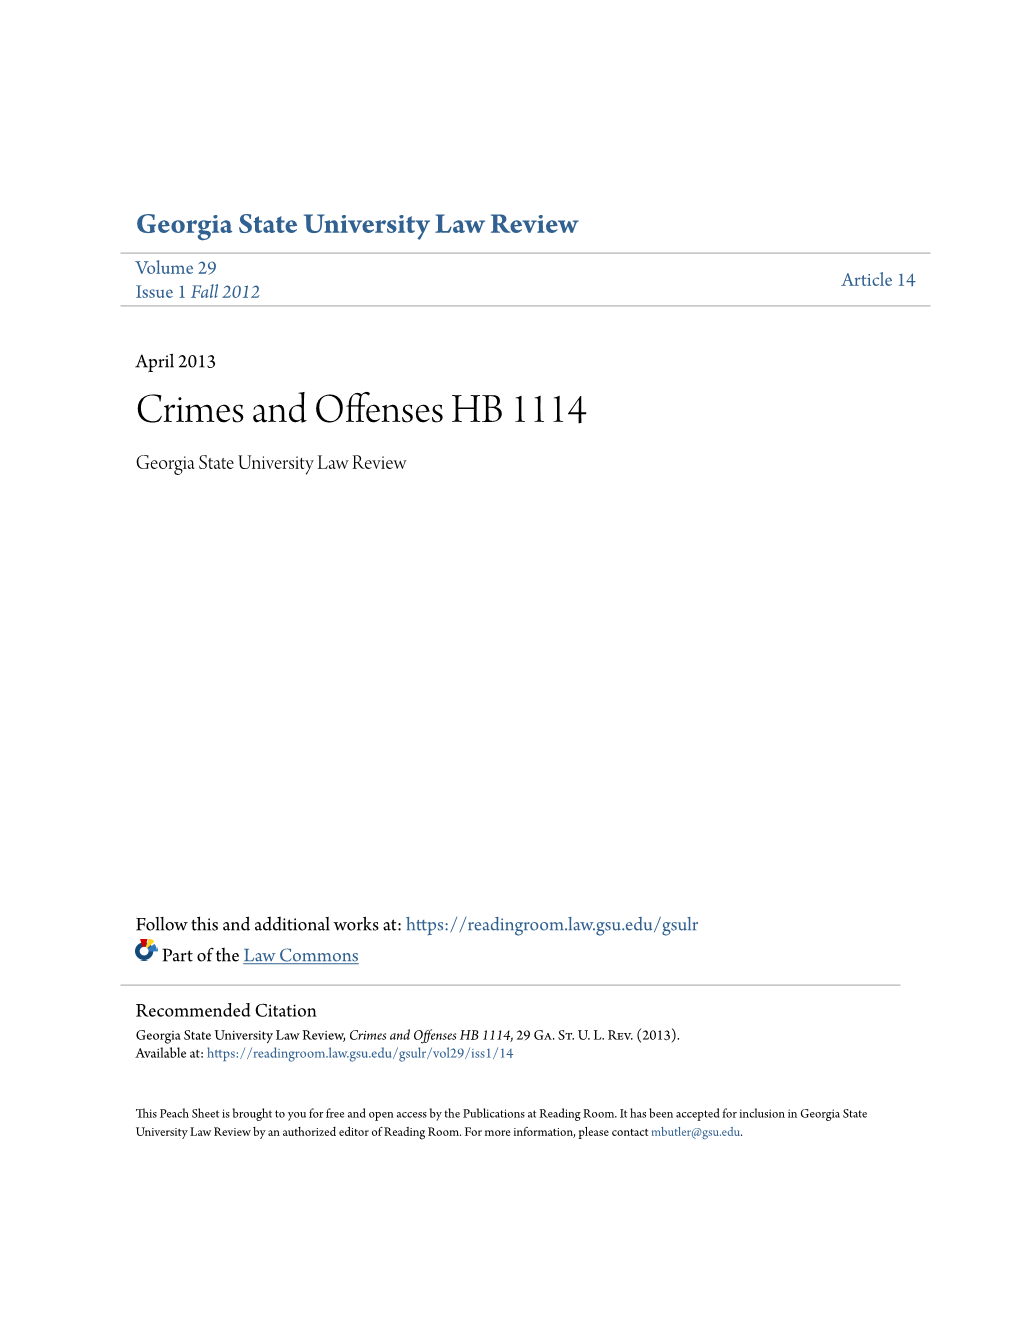 Crimes and Offenses HB 1114 Georgia State University Law Review